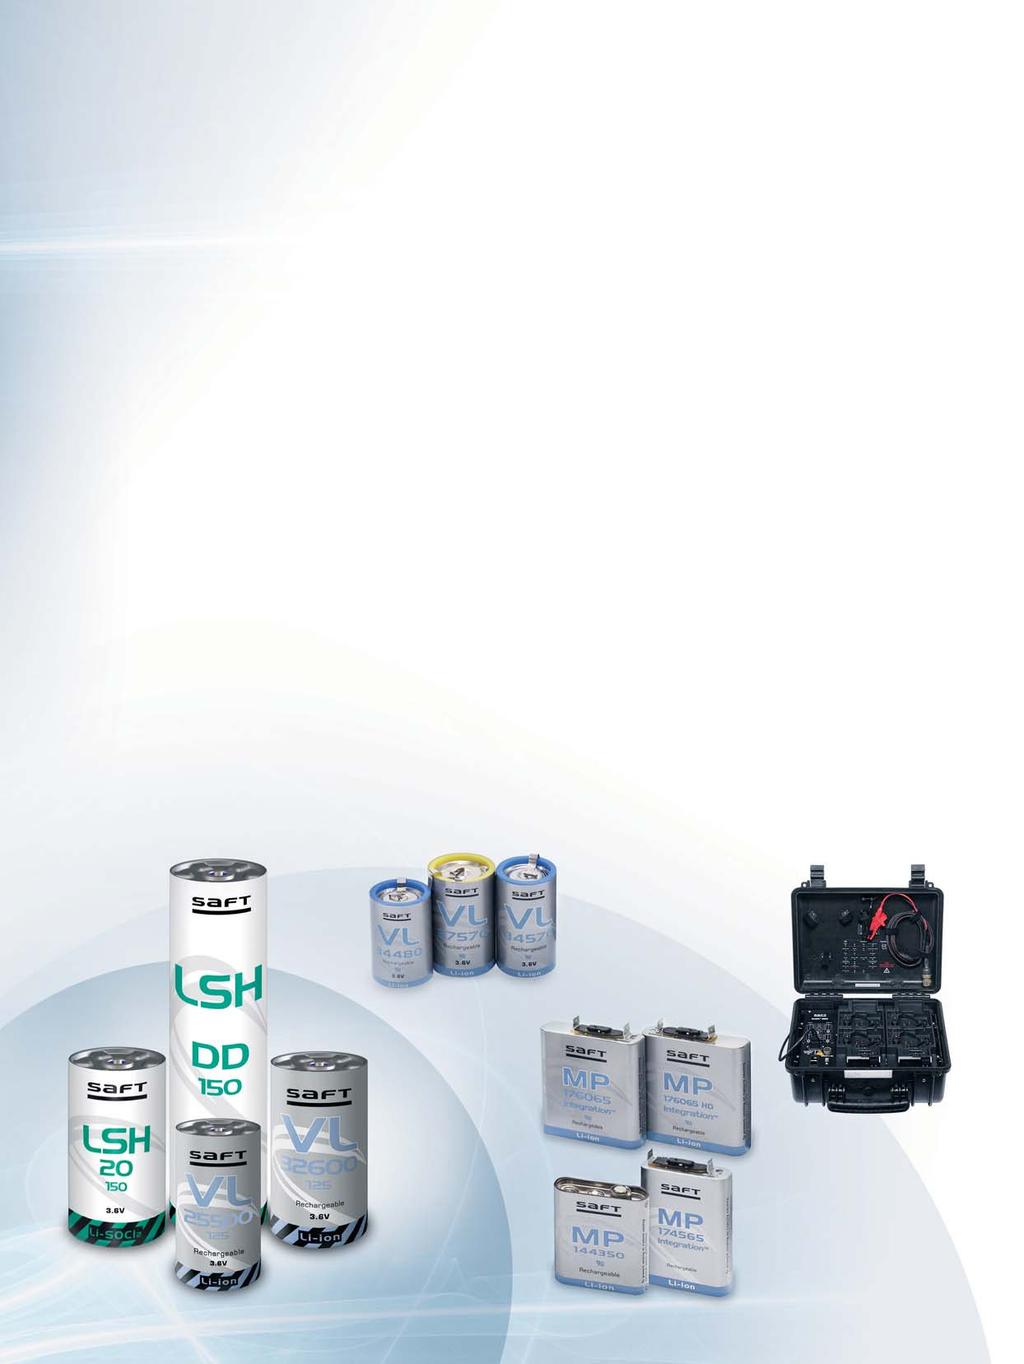 Saft The leading edge in battery technology Saft is a major player in battery technologies for the Oil & Gas industry, supplying turnkey battery solutions at each step in a well s life cycle.